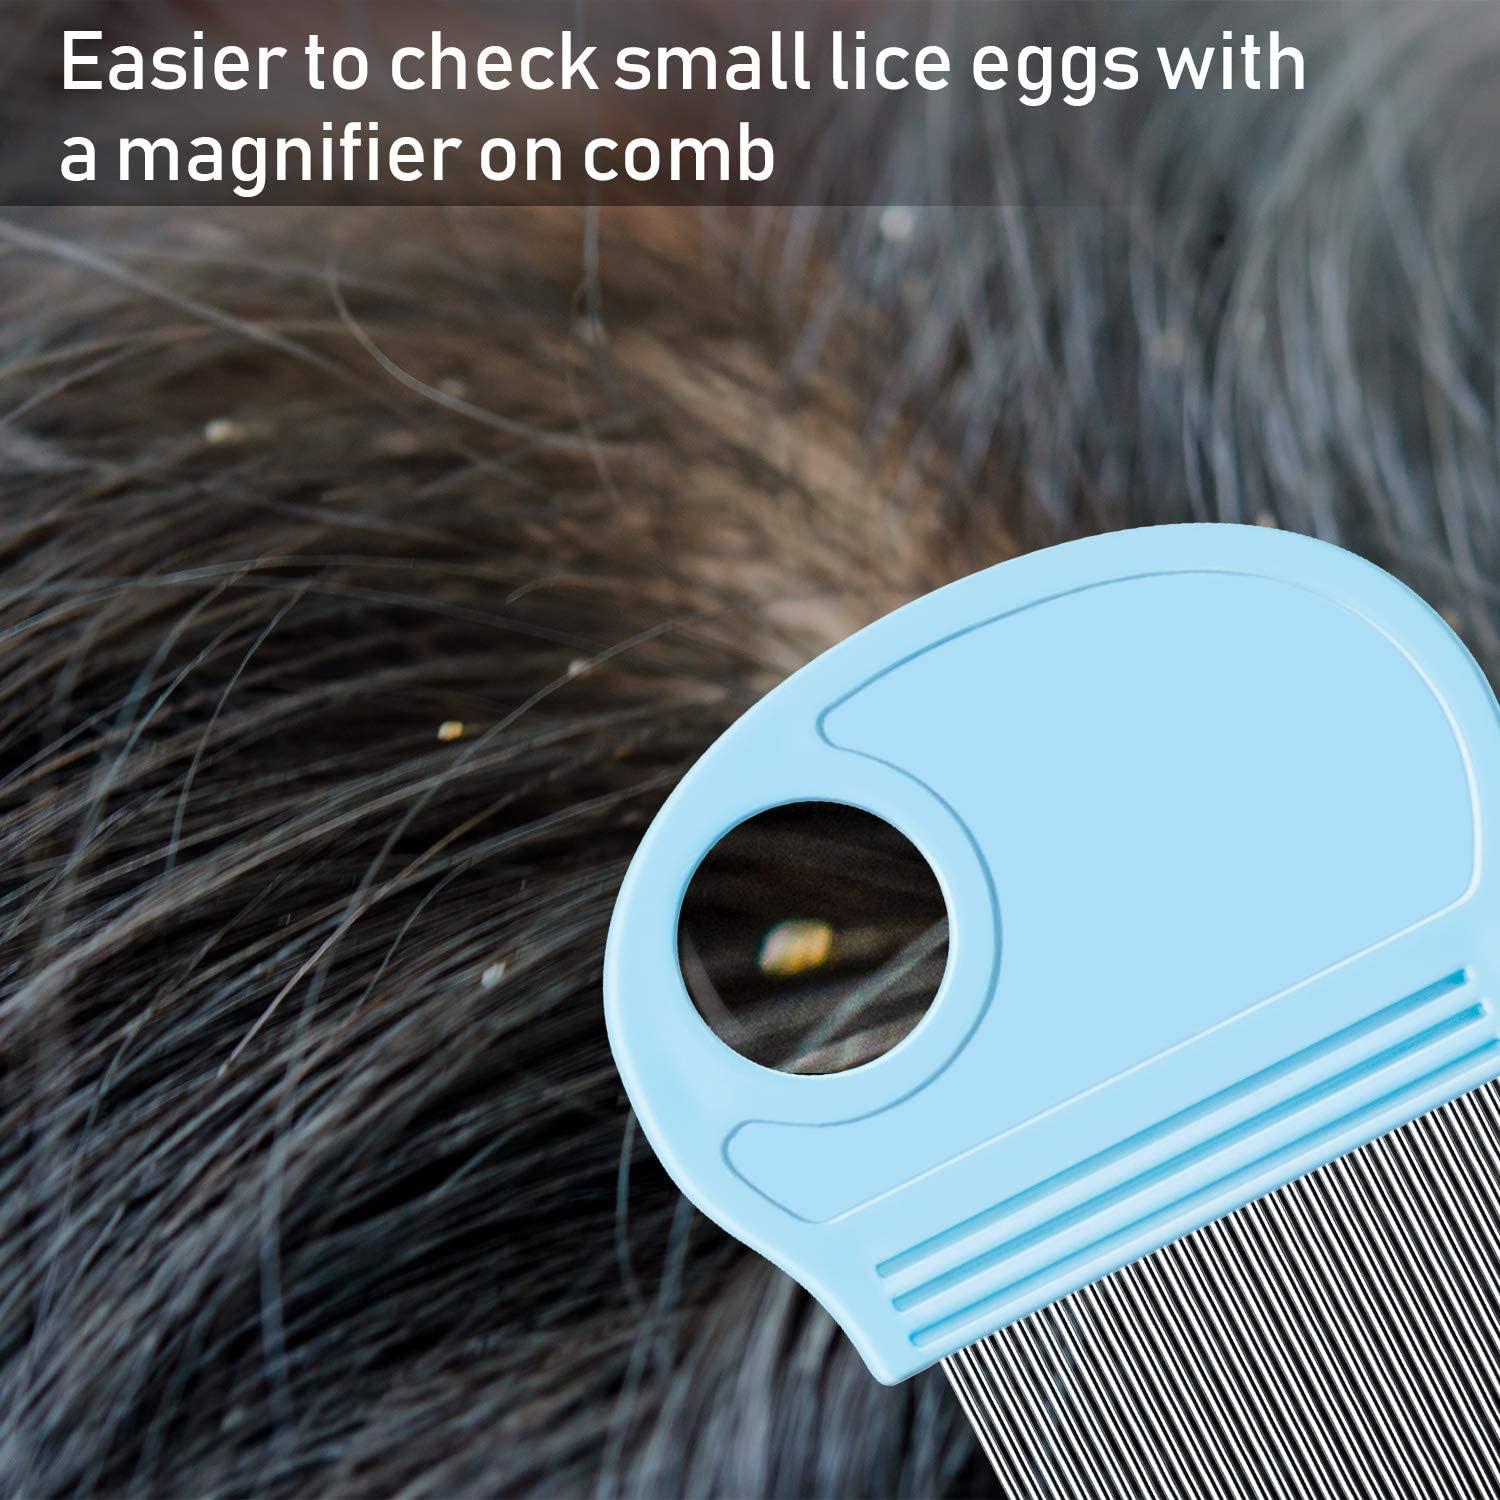 6 Pieces Head Lice Remover Nit Removal Hair Comb with Magnifier, Fine Metal  Teeth Tool for Dogs Cats Pet Human Grooming and Removing Dandruff Flakes/Lice  Eggs (Sky Blue)